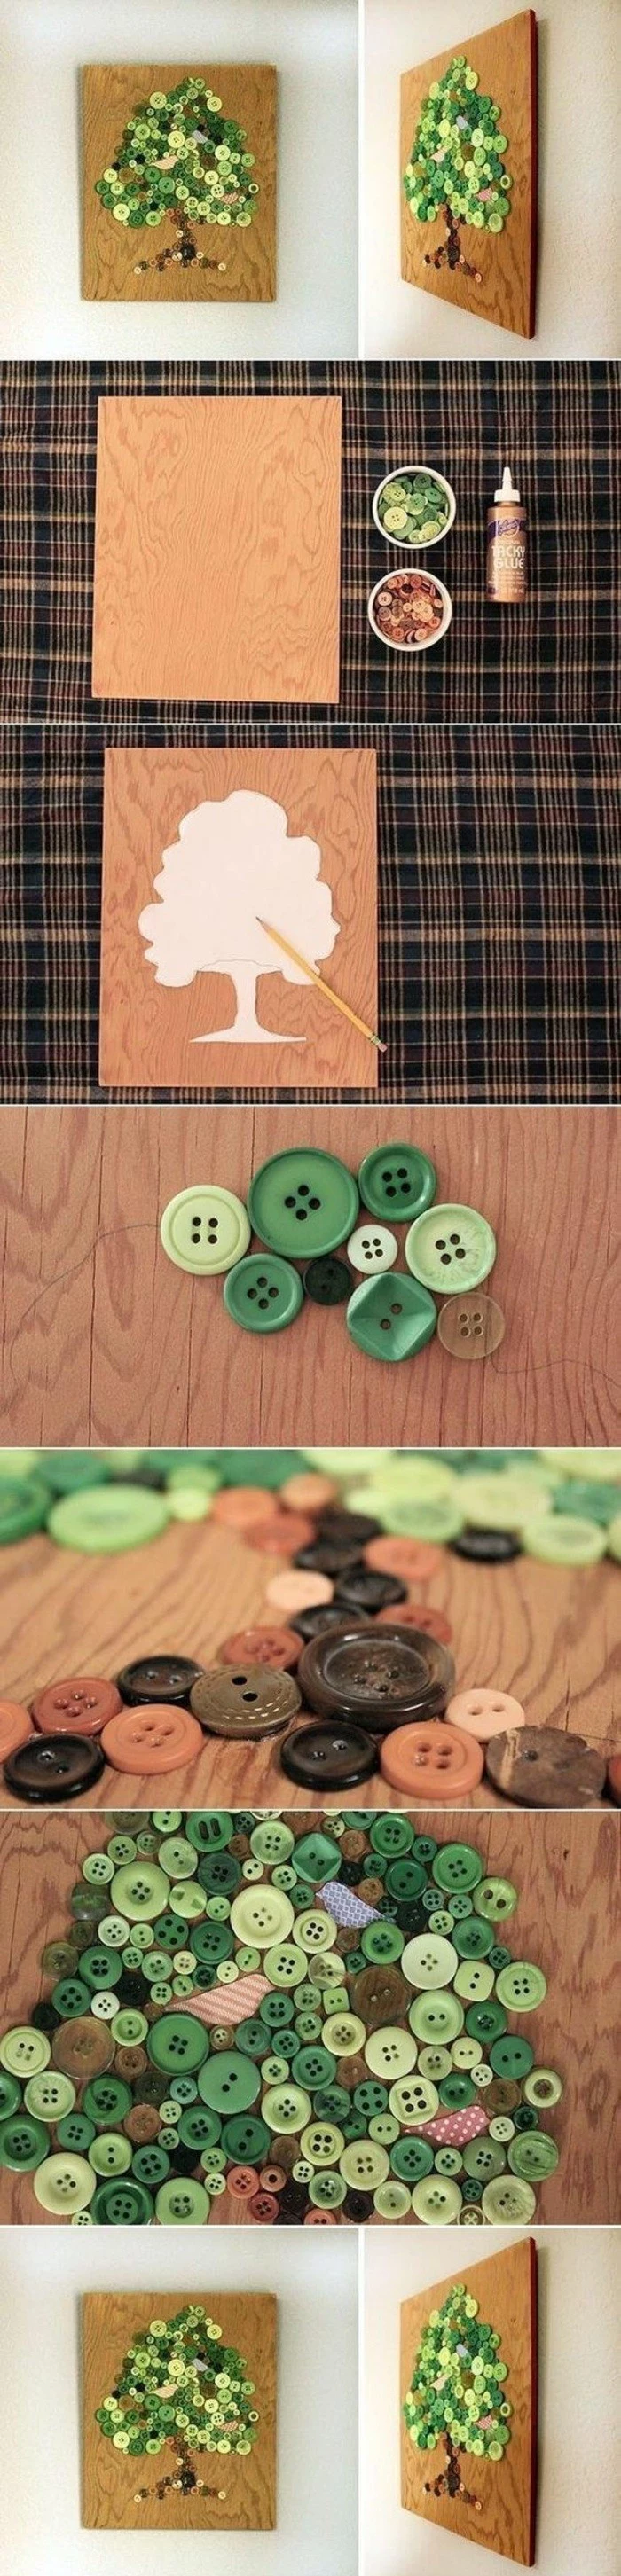 wooden board, green and brown buttons, forming a tree, unique wall decor, step by step, diy tutorial